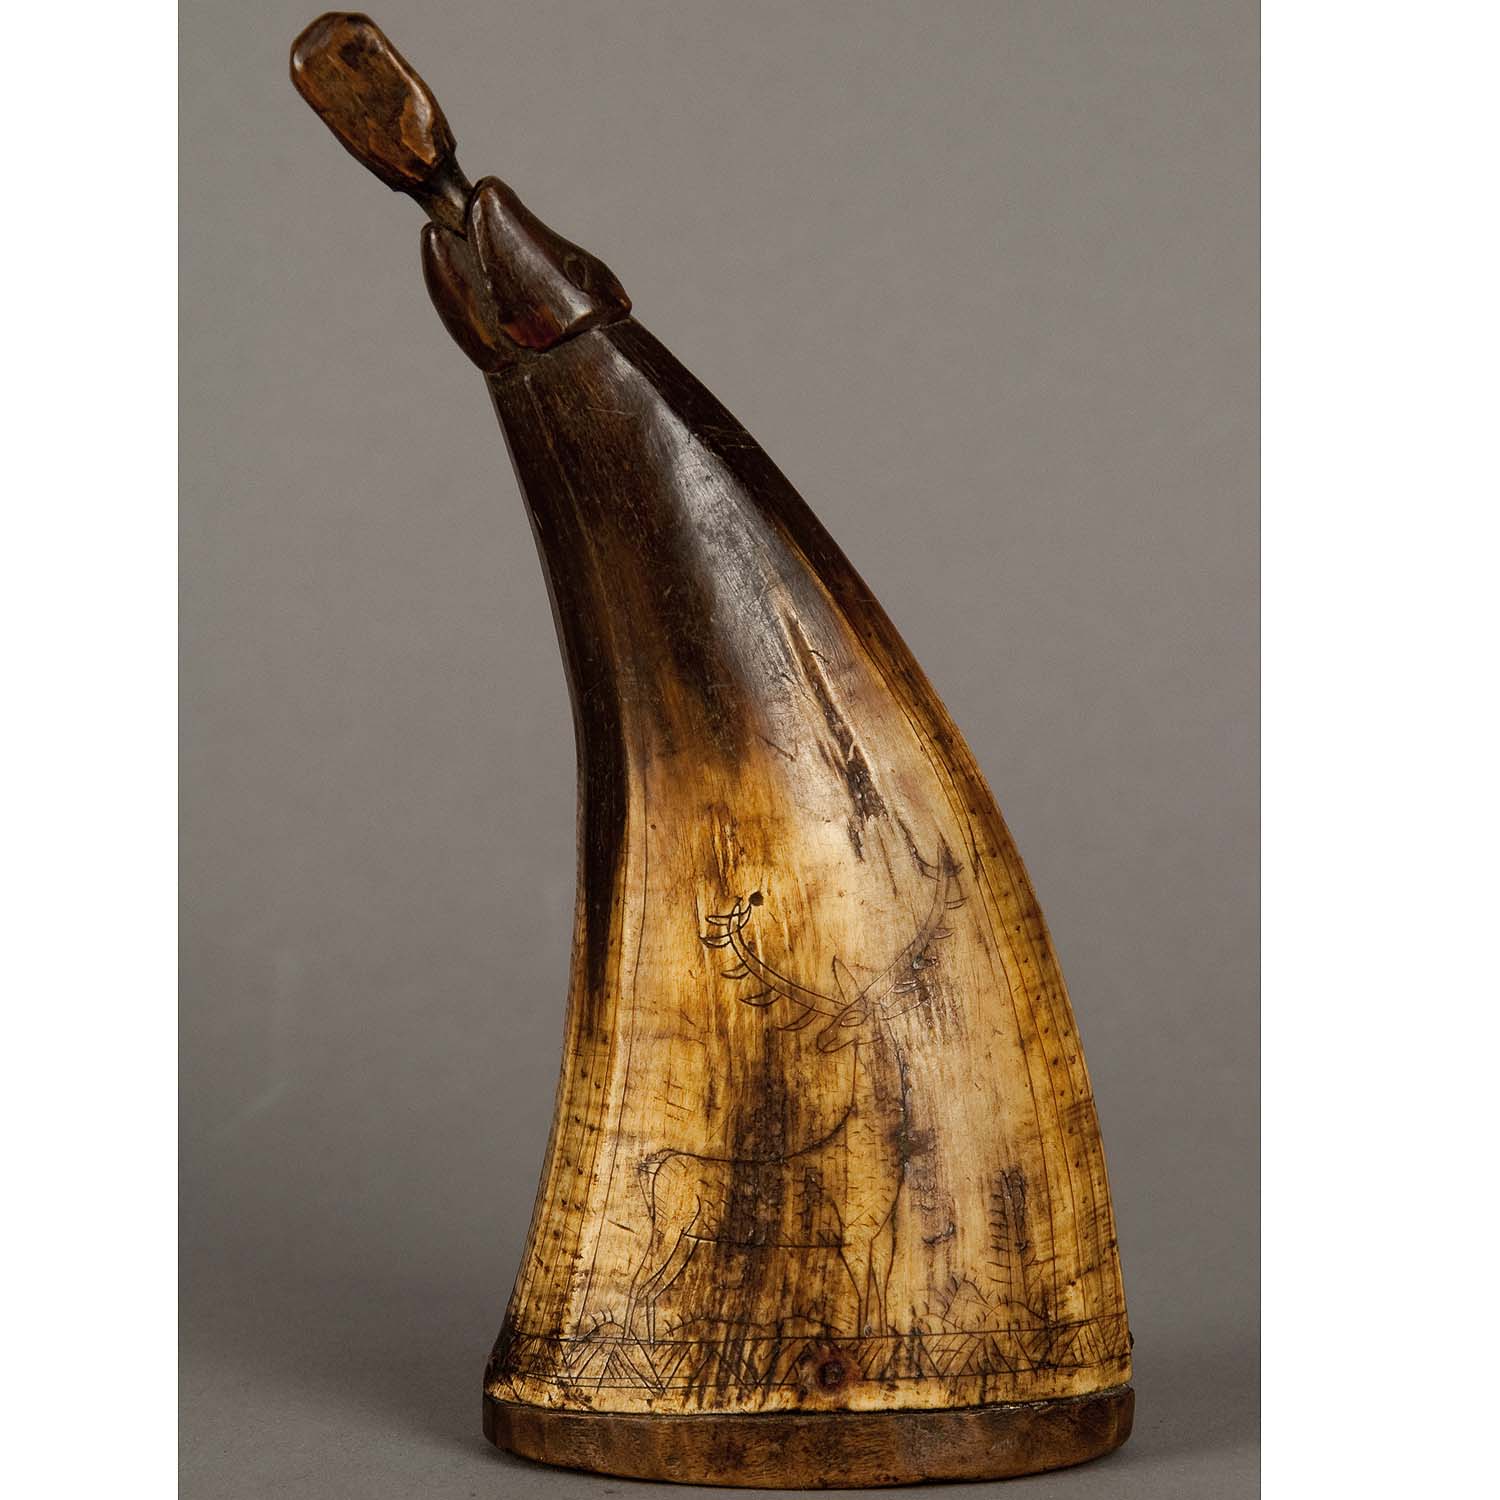 Gunpowder Horn with Great Engravings 18th century